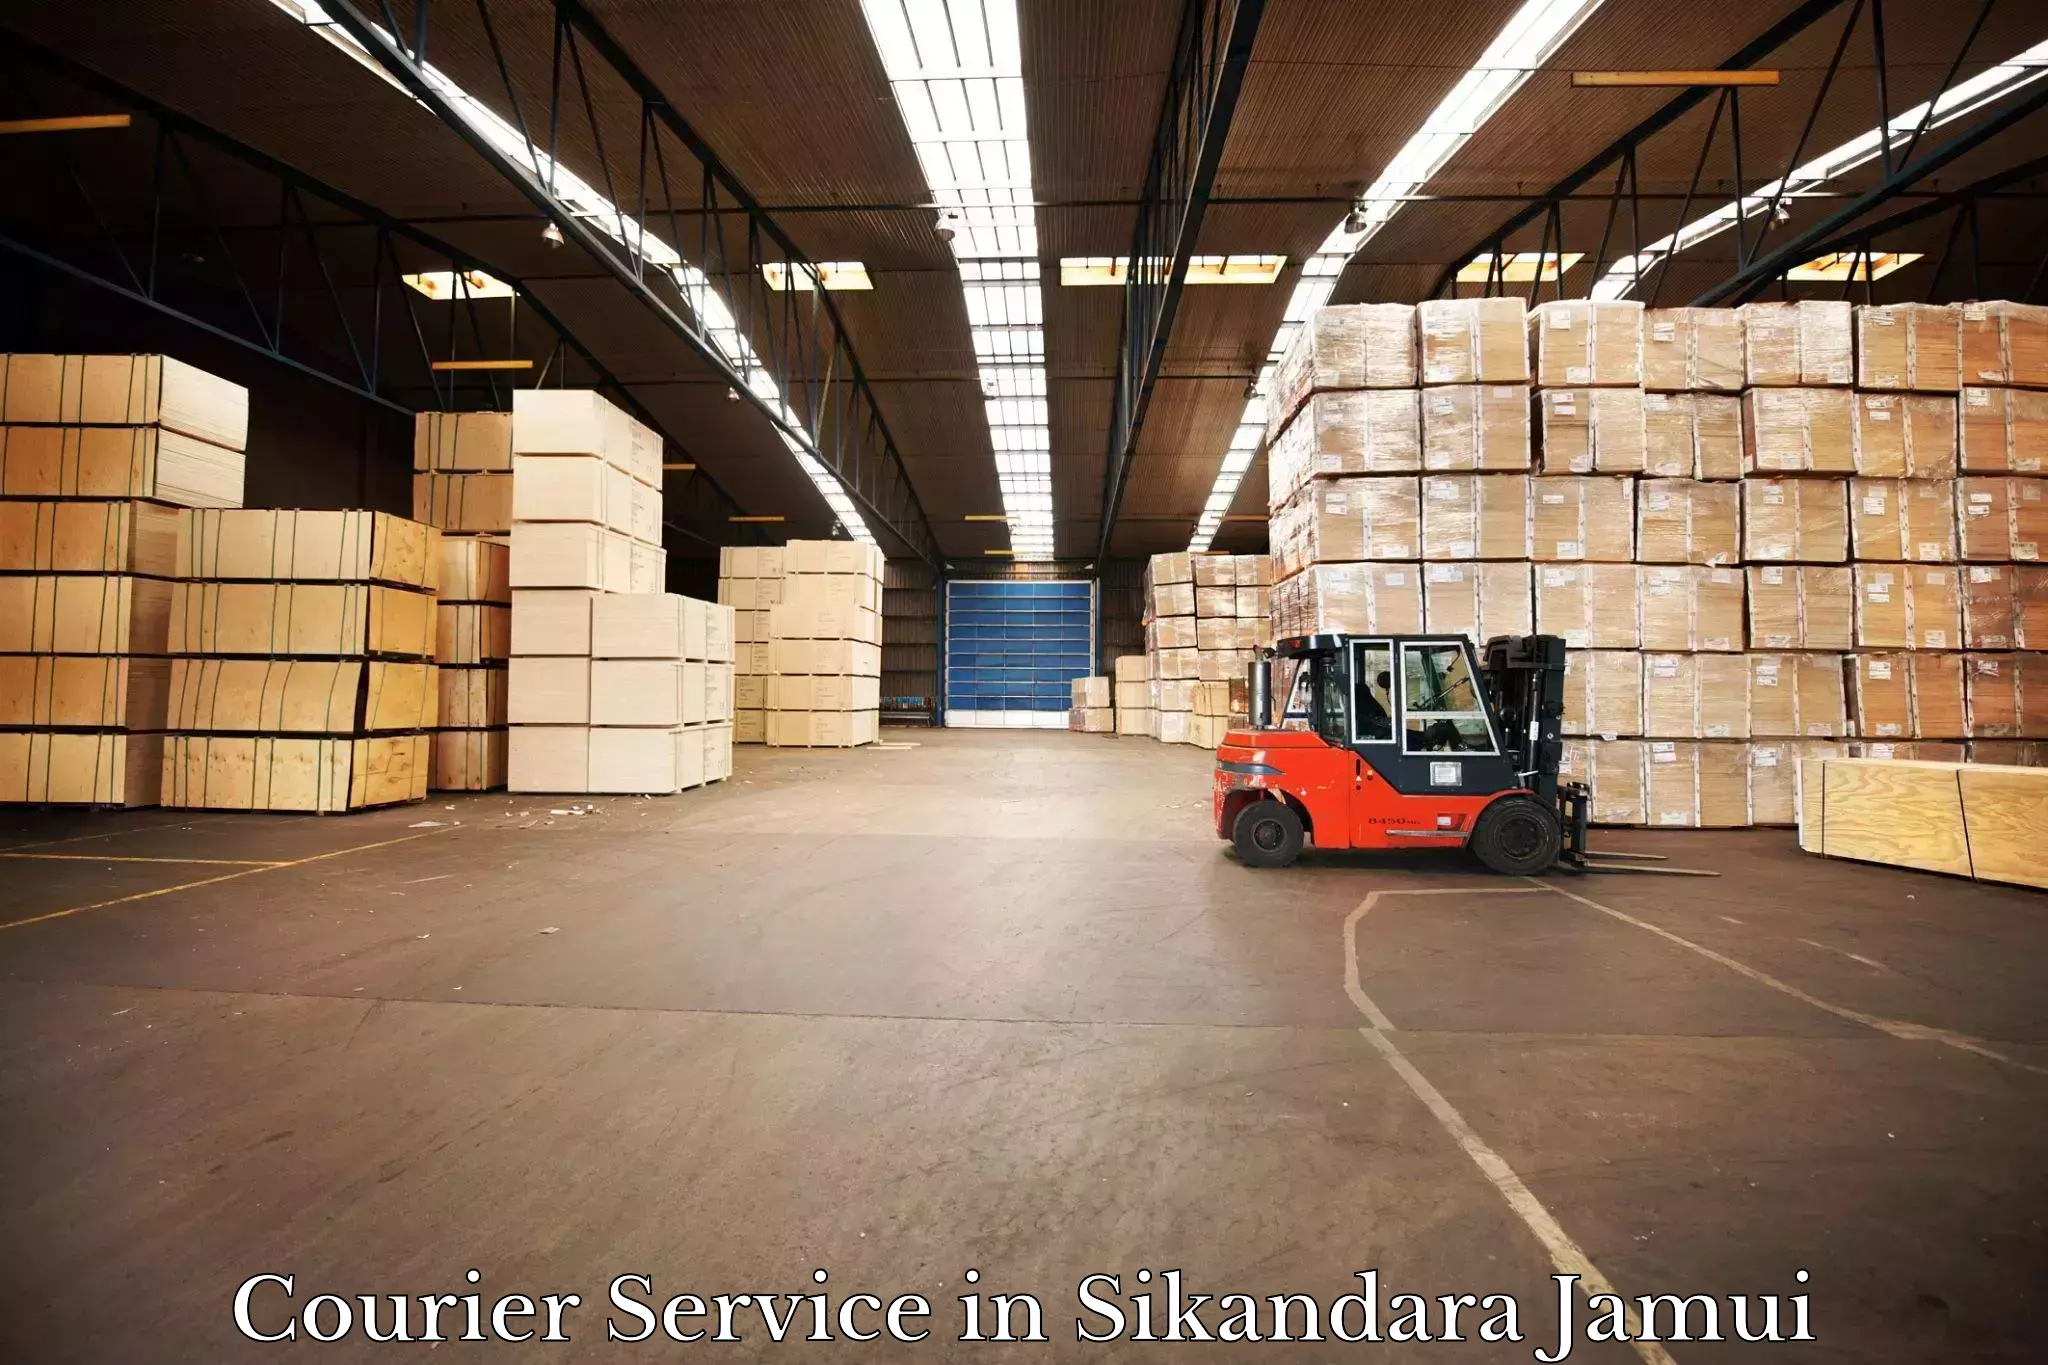 Courier service efficiency in Sikandara Jamui